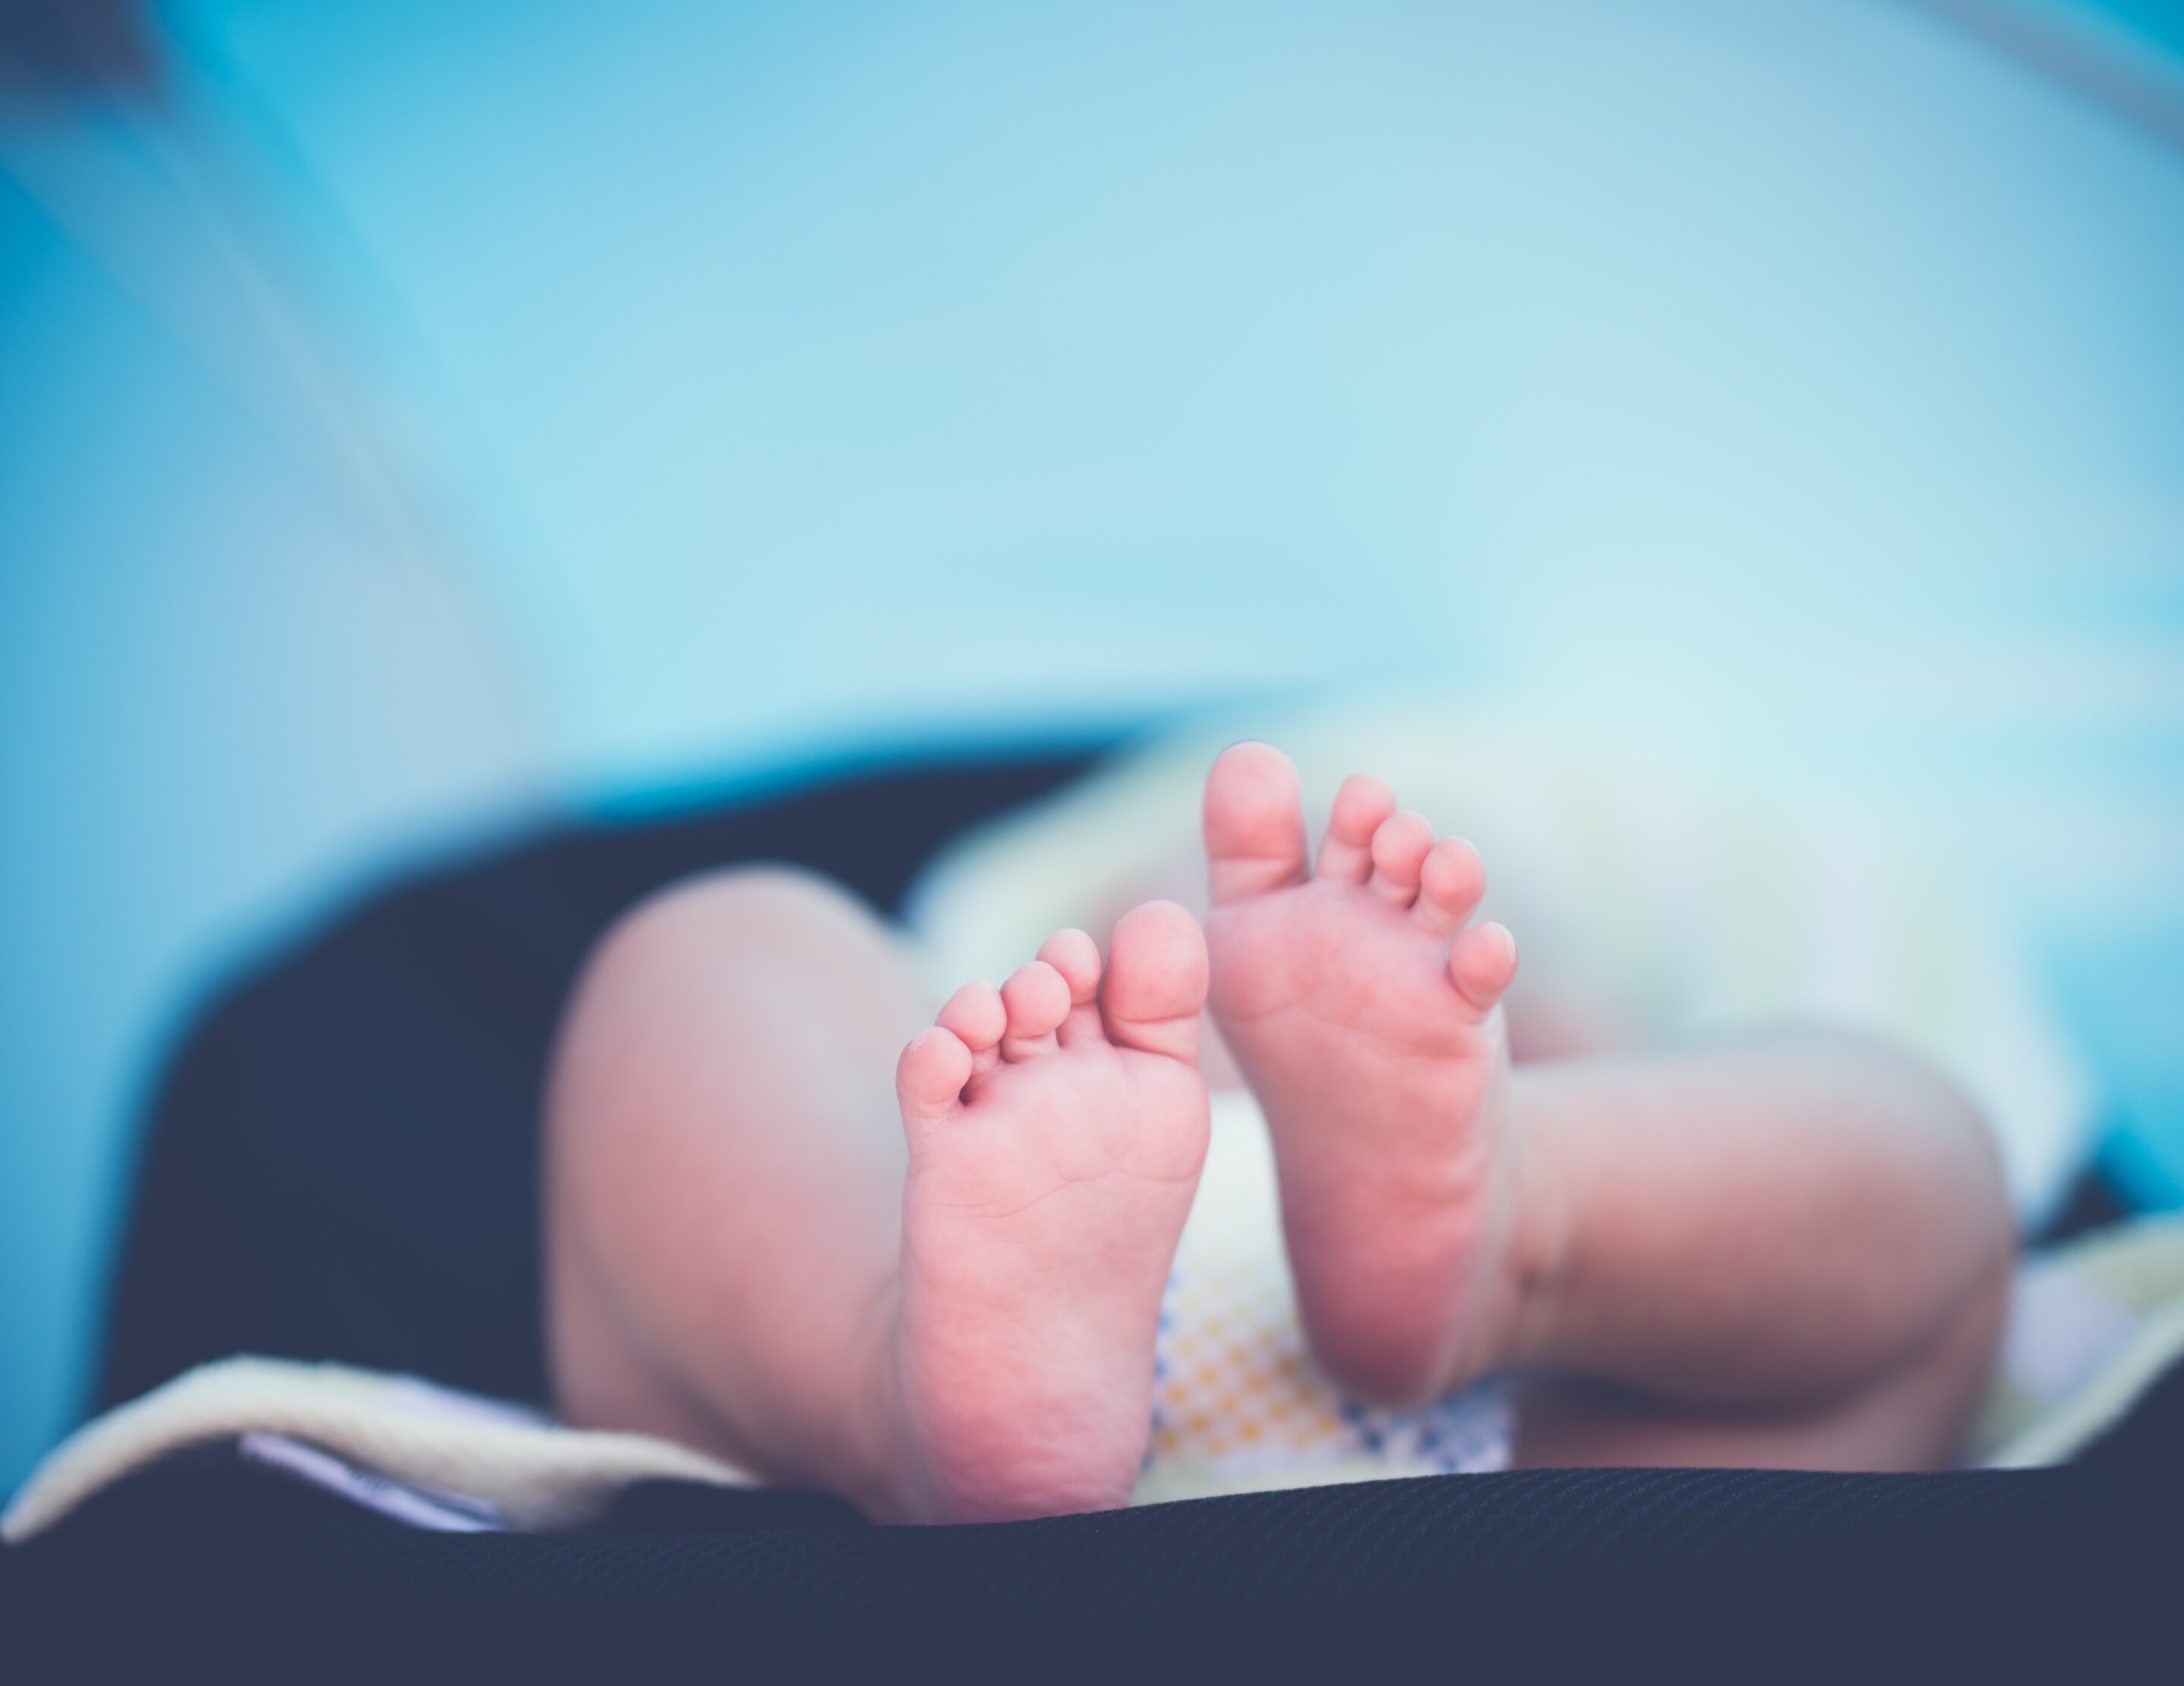 Mozart lullaby may ameliorate pain in newborns during heel prick blood test